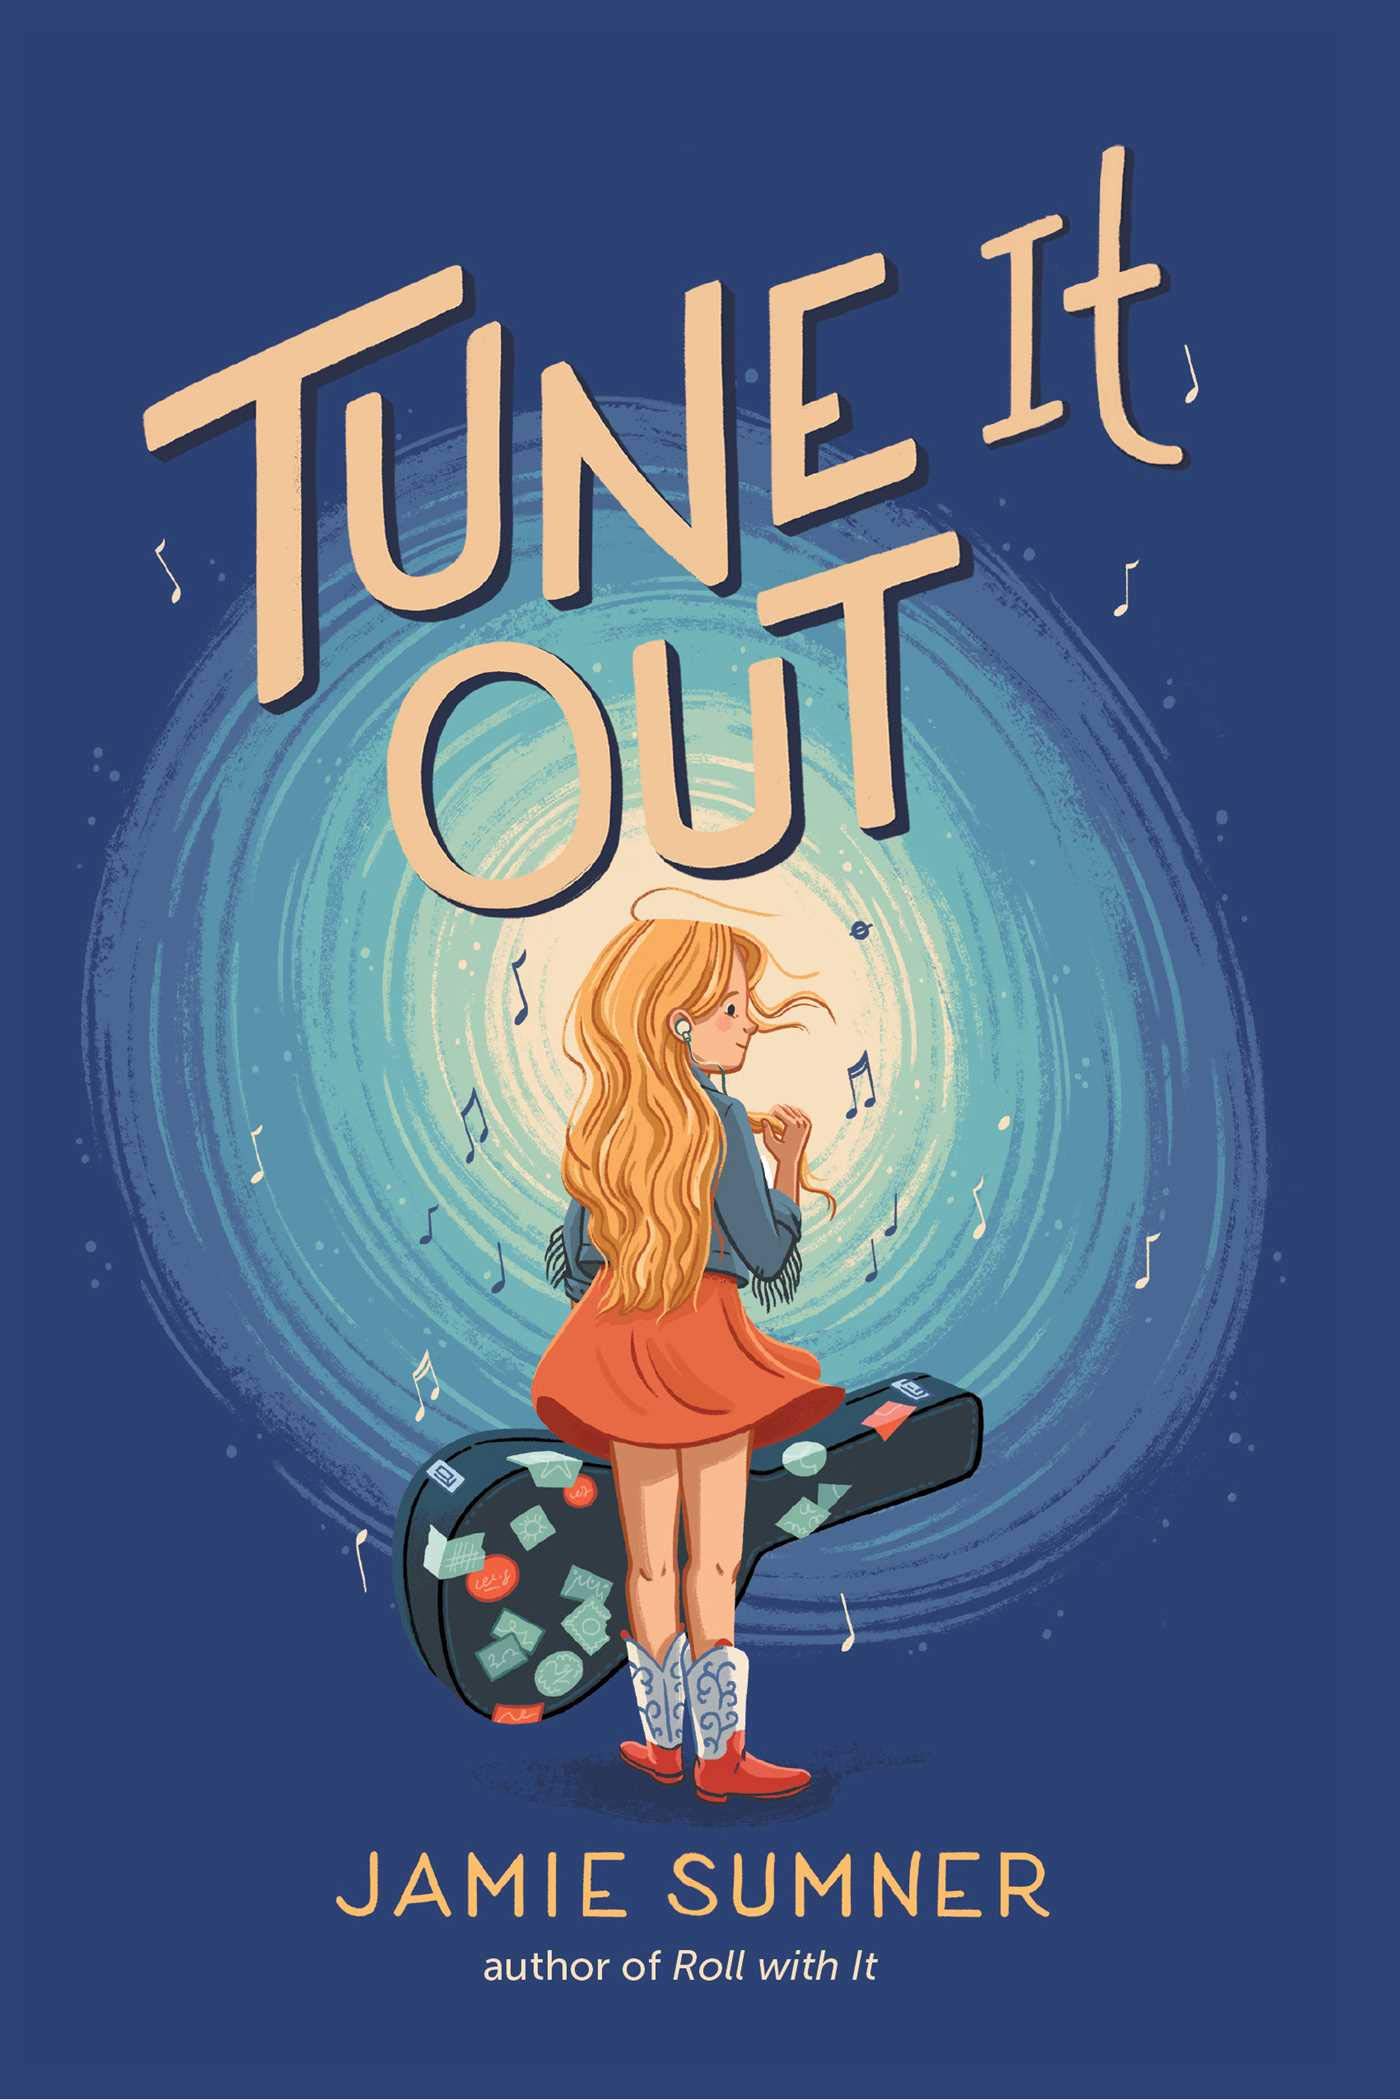 image for "tune it out"